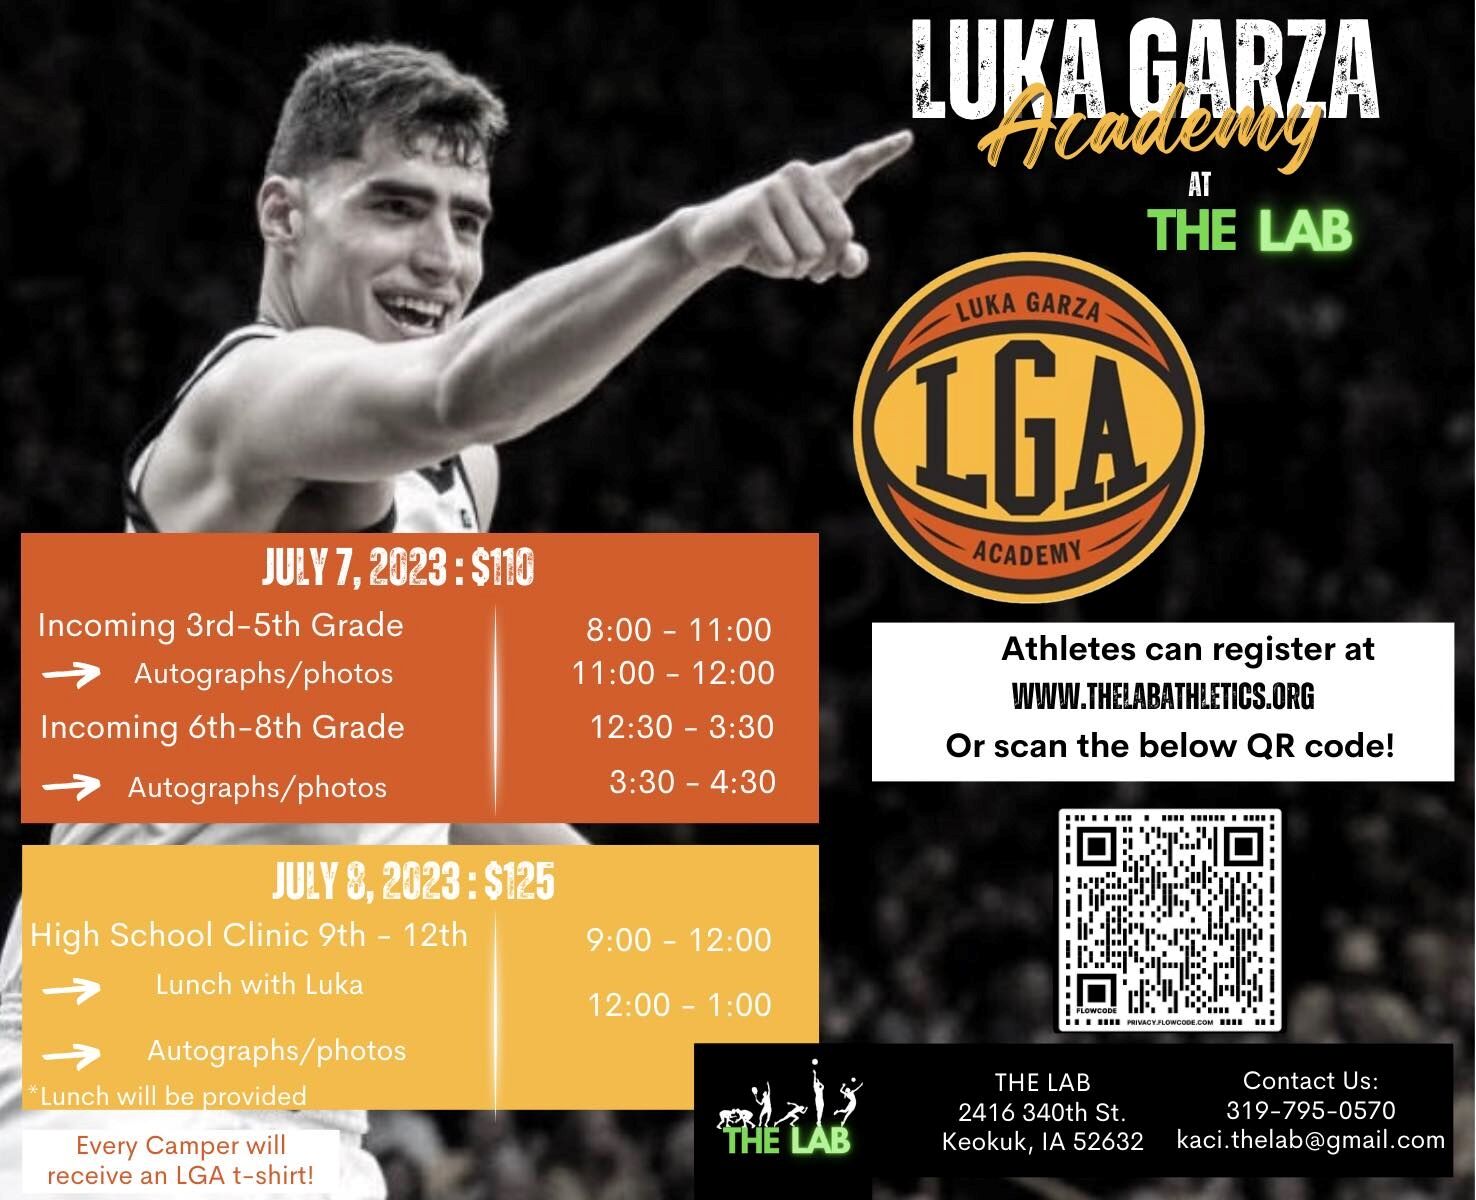 The Lab and The Hidden Tower to open next weekend with NBA star Luka Garza, Daily Gate City - Keokuk, Iowa